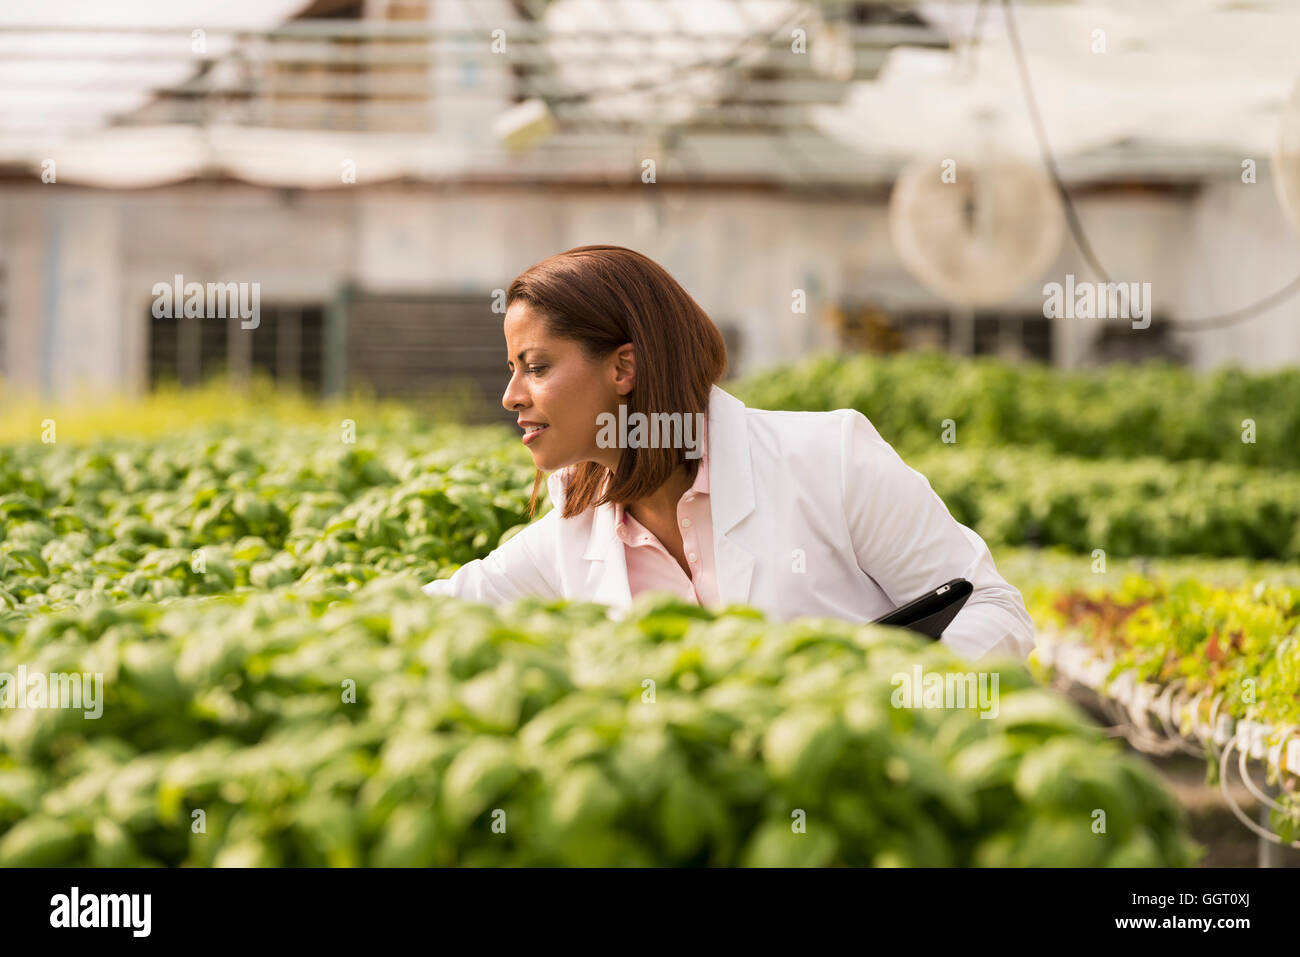 Black scientist checking green basil plants in greenhouse Stock Photo